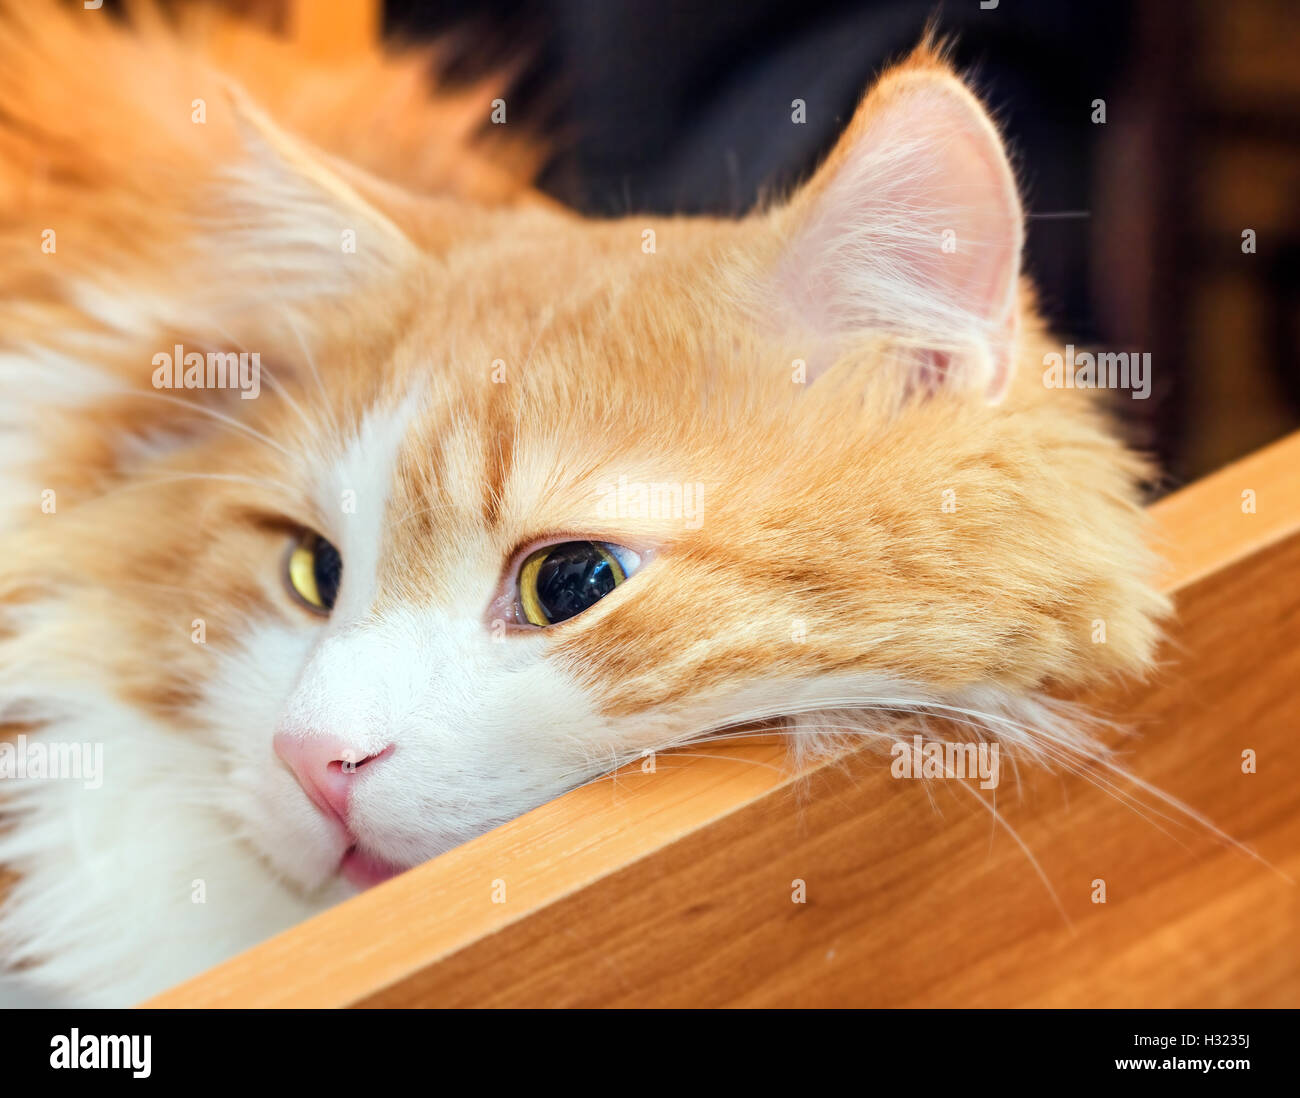 Nice adult red cat in orange wooden table drawer Stock Photo